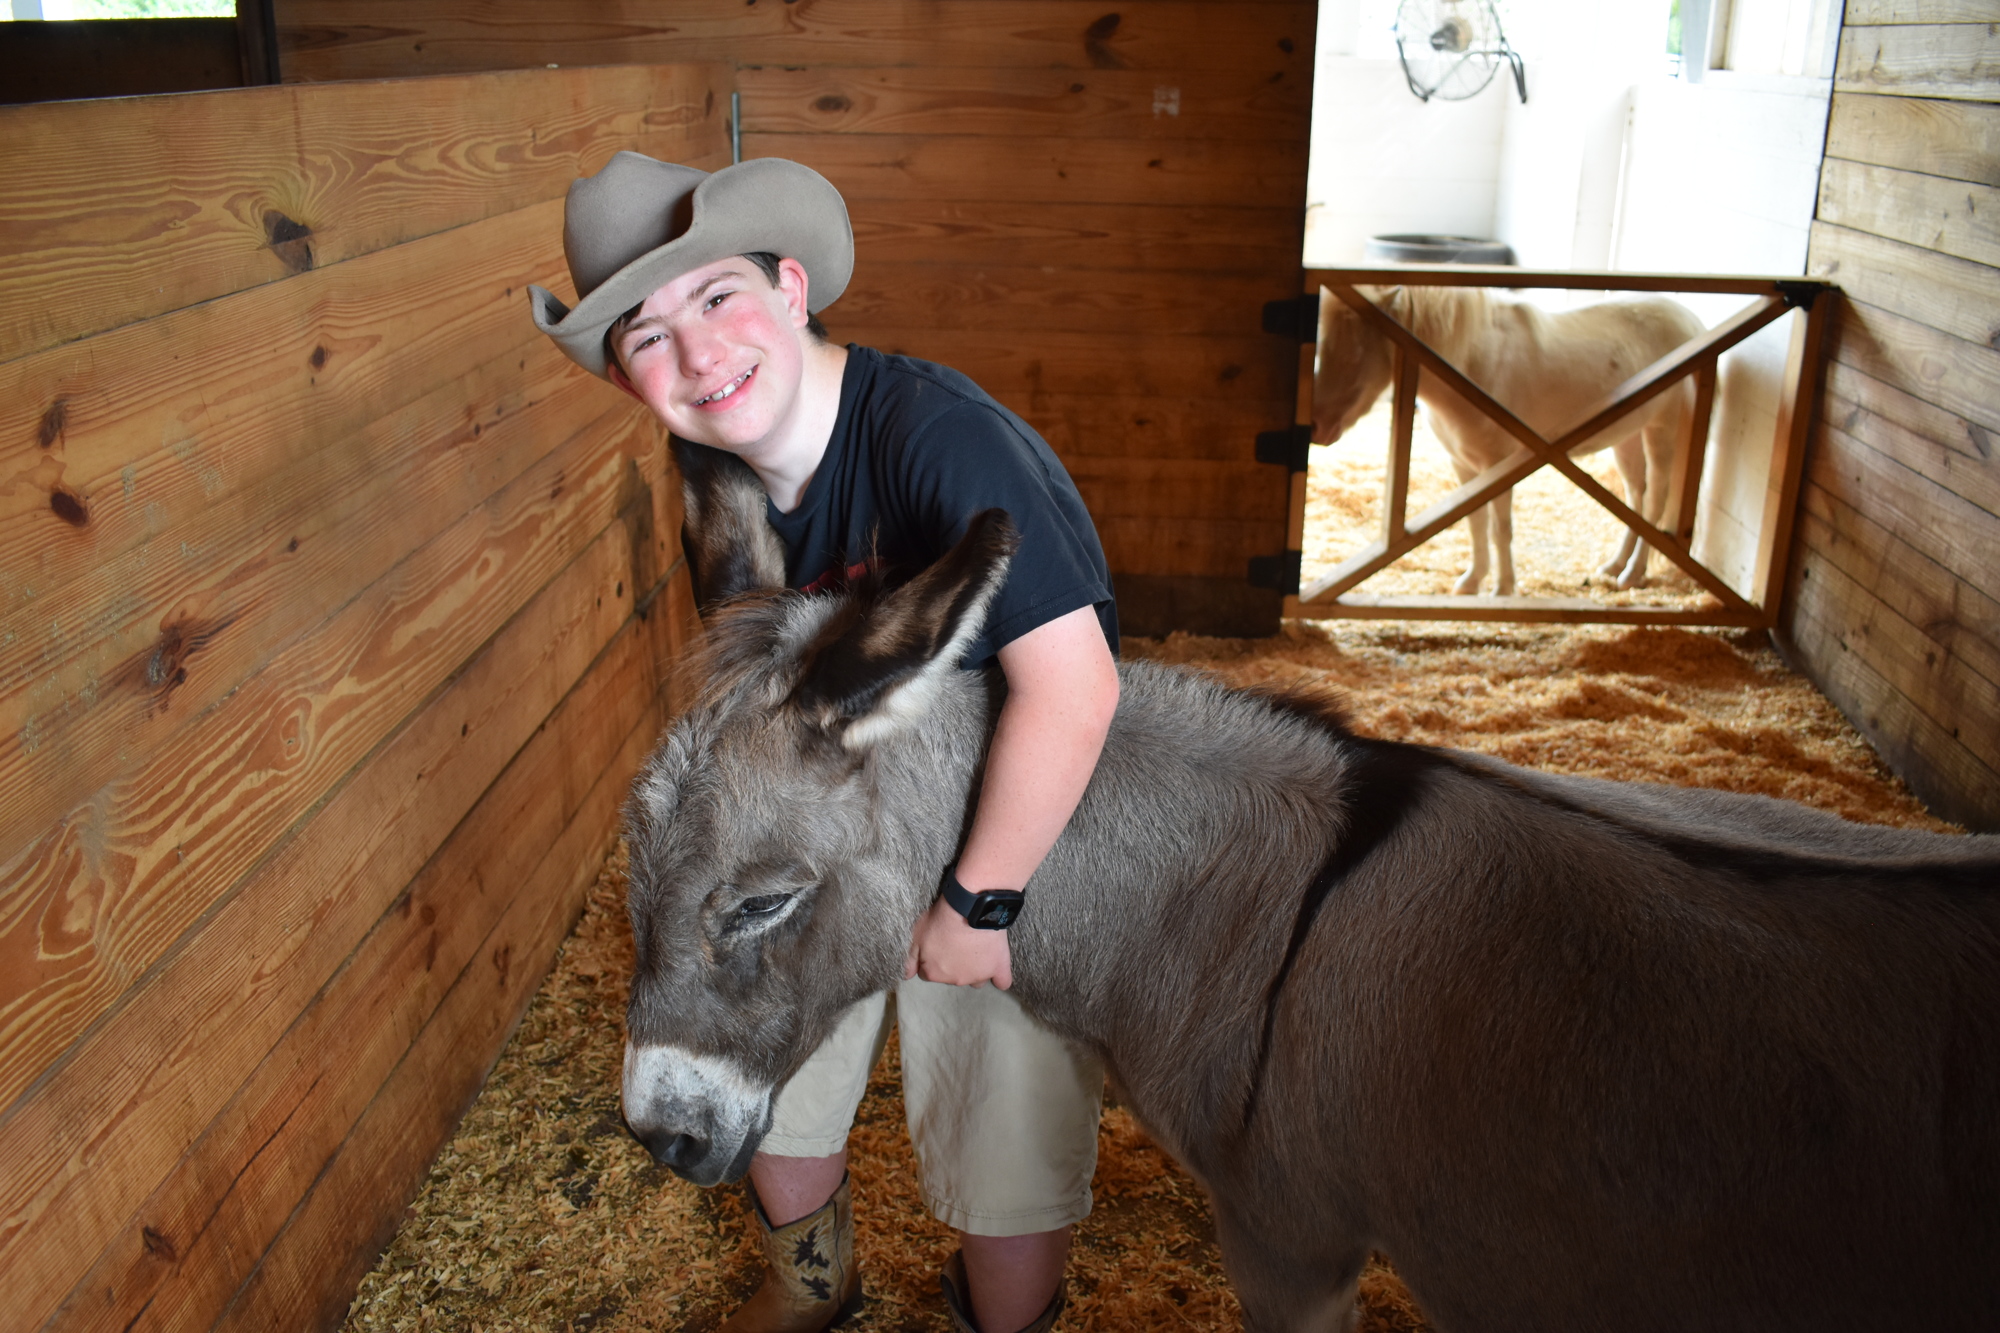 Lakewood Ranch's 13-year-old Mason Kramer has formed a bond with a donkey, named Donkey. (Photo by Ian Swaby)